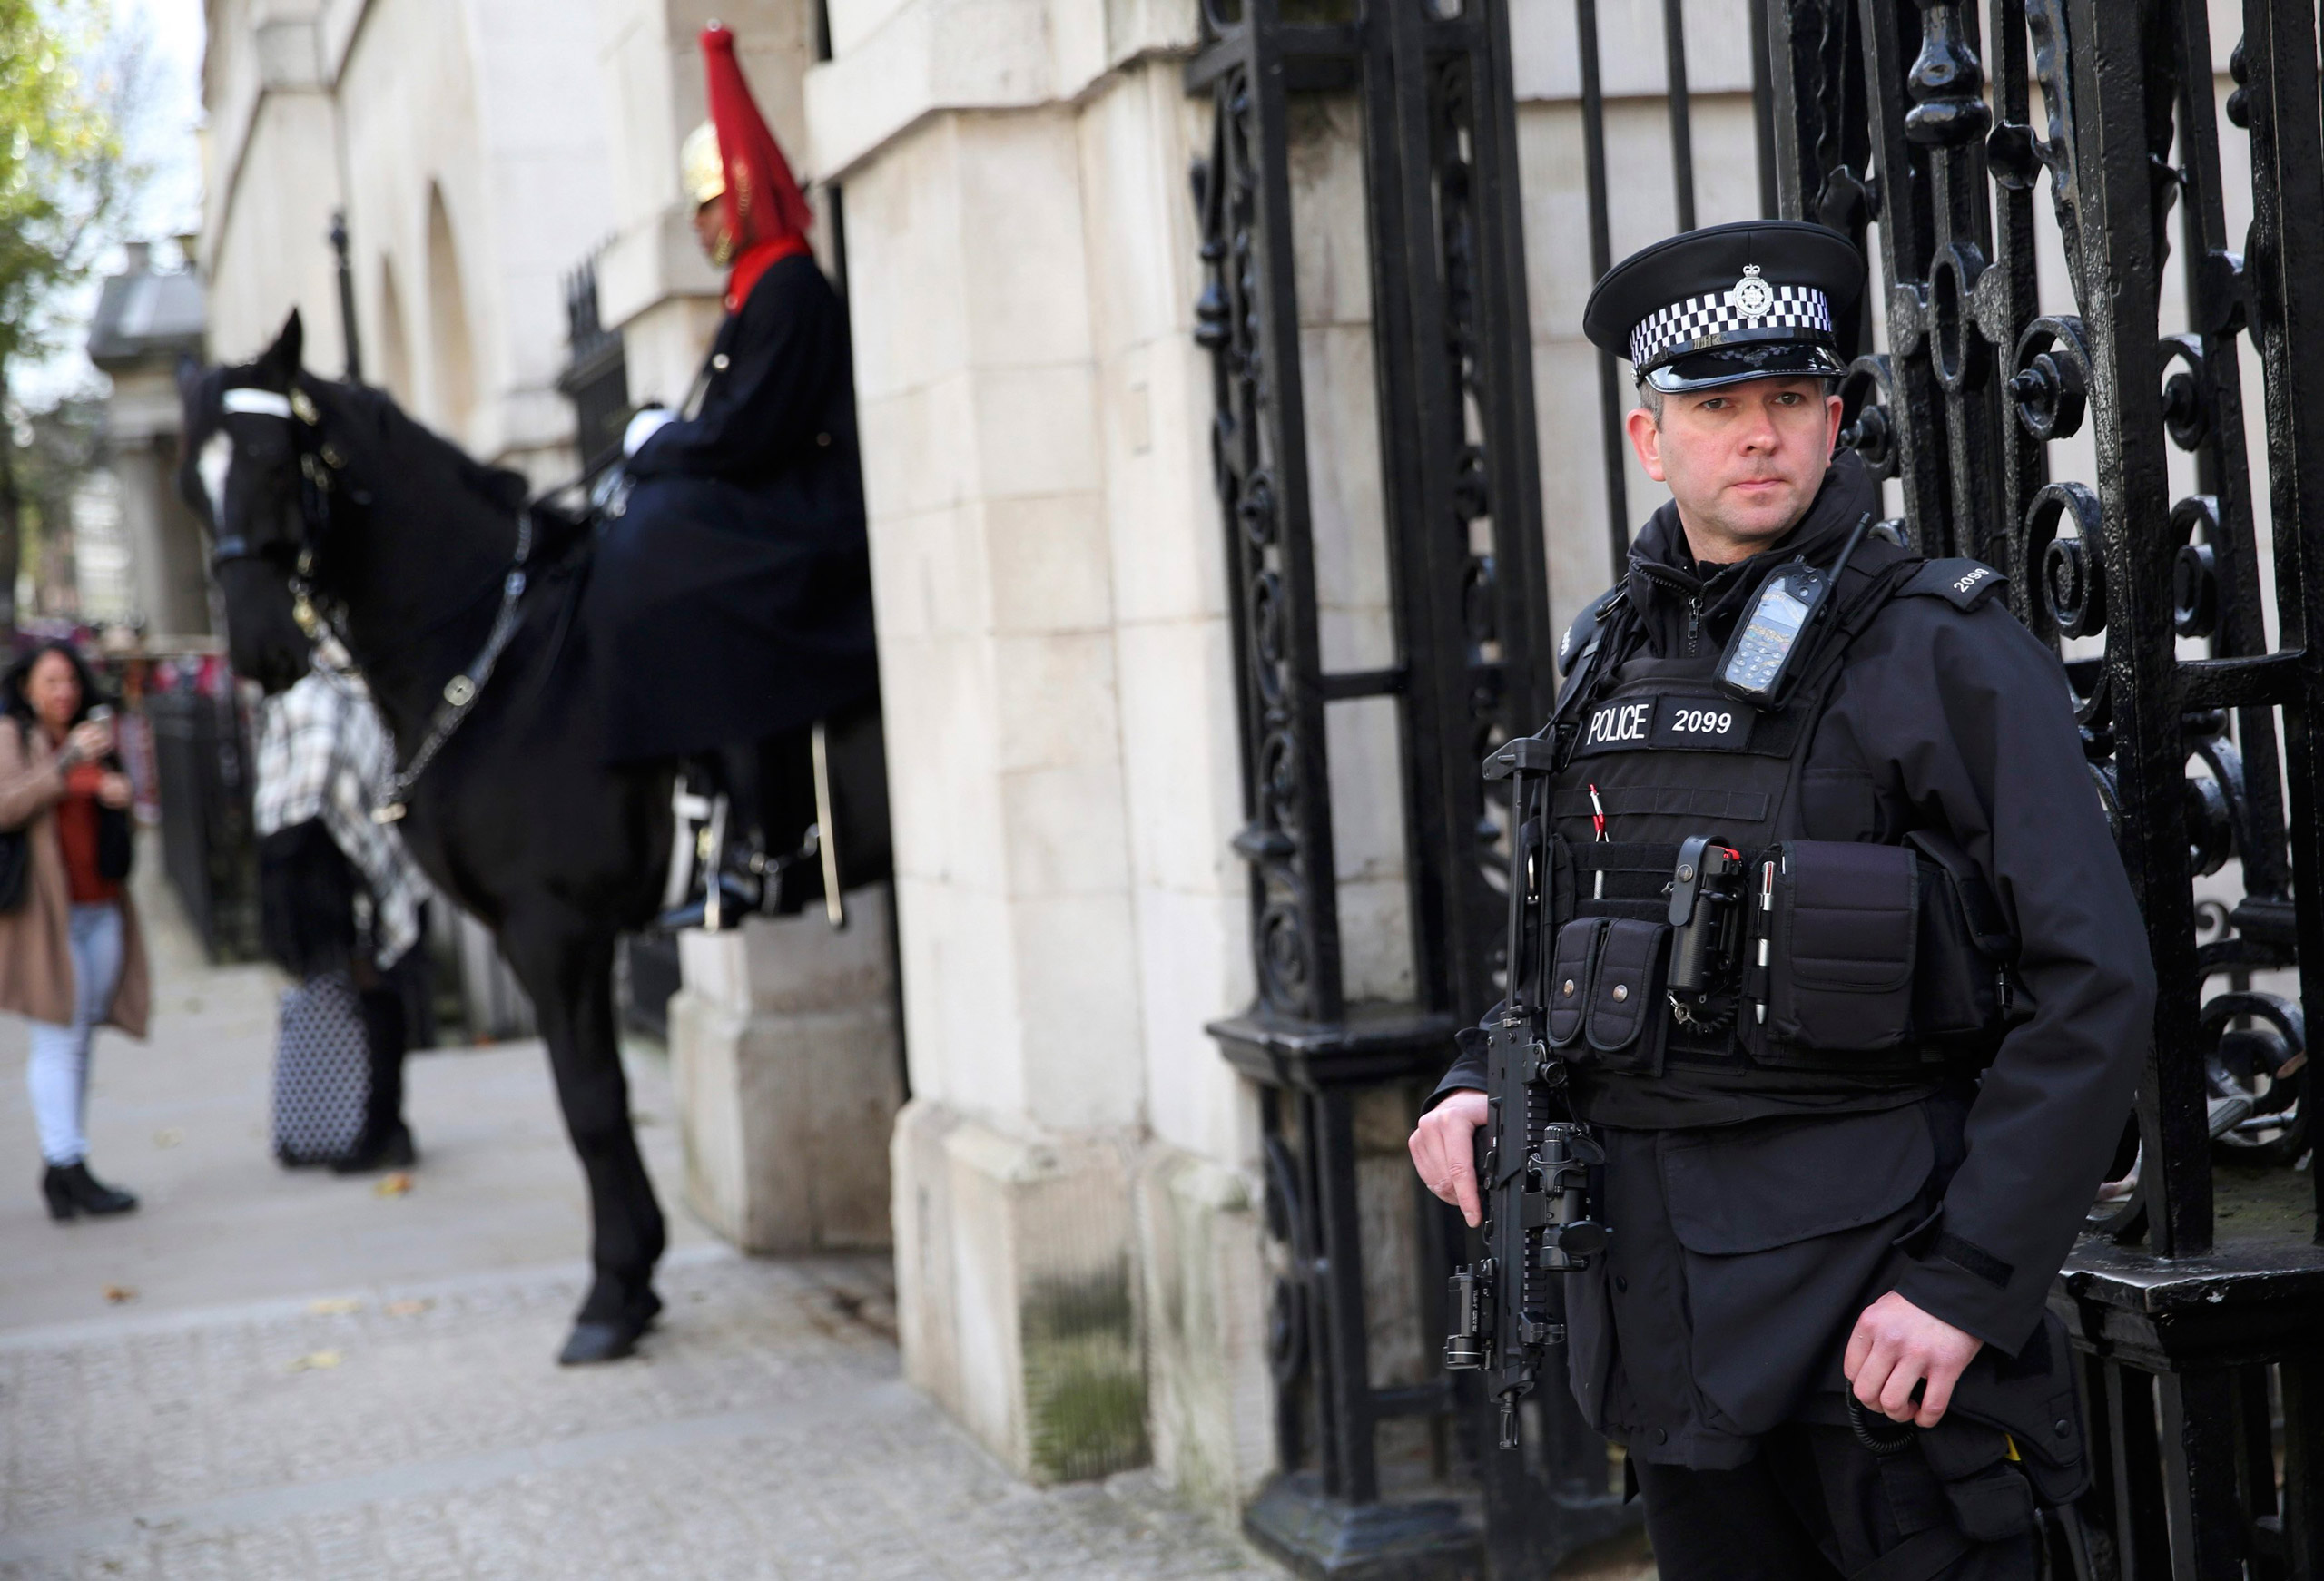 An armed police officer stands  outside Horseguards on Whitehall in London, Britain November 18, 2015. REUTERS/Neil Hall